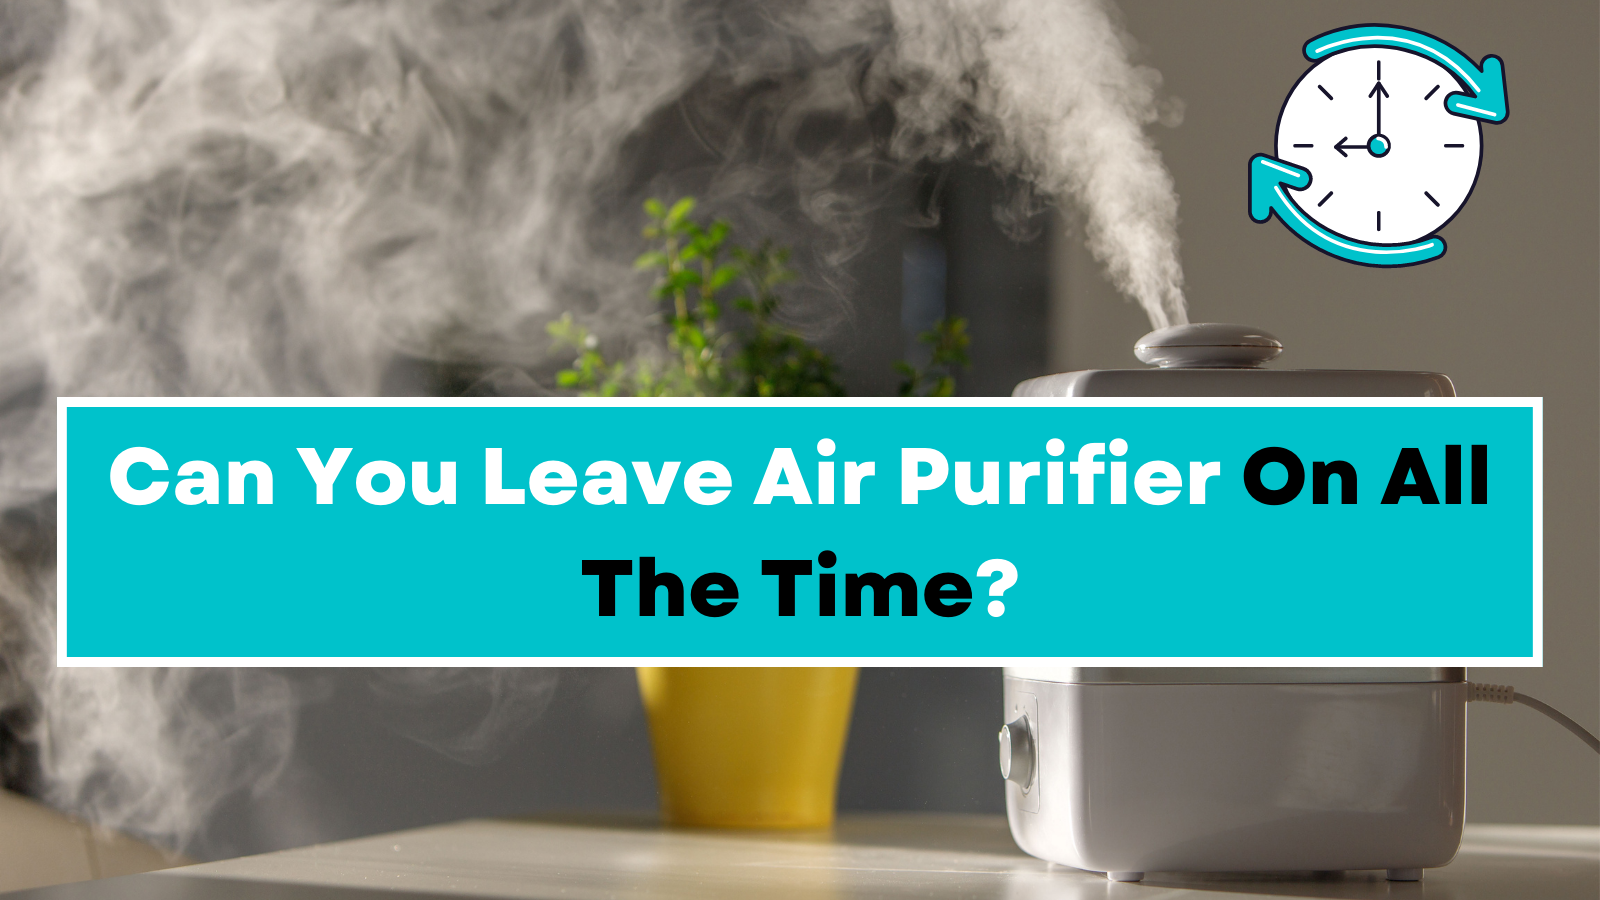 Can You Leave Air Purifier On All The Time